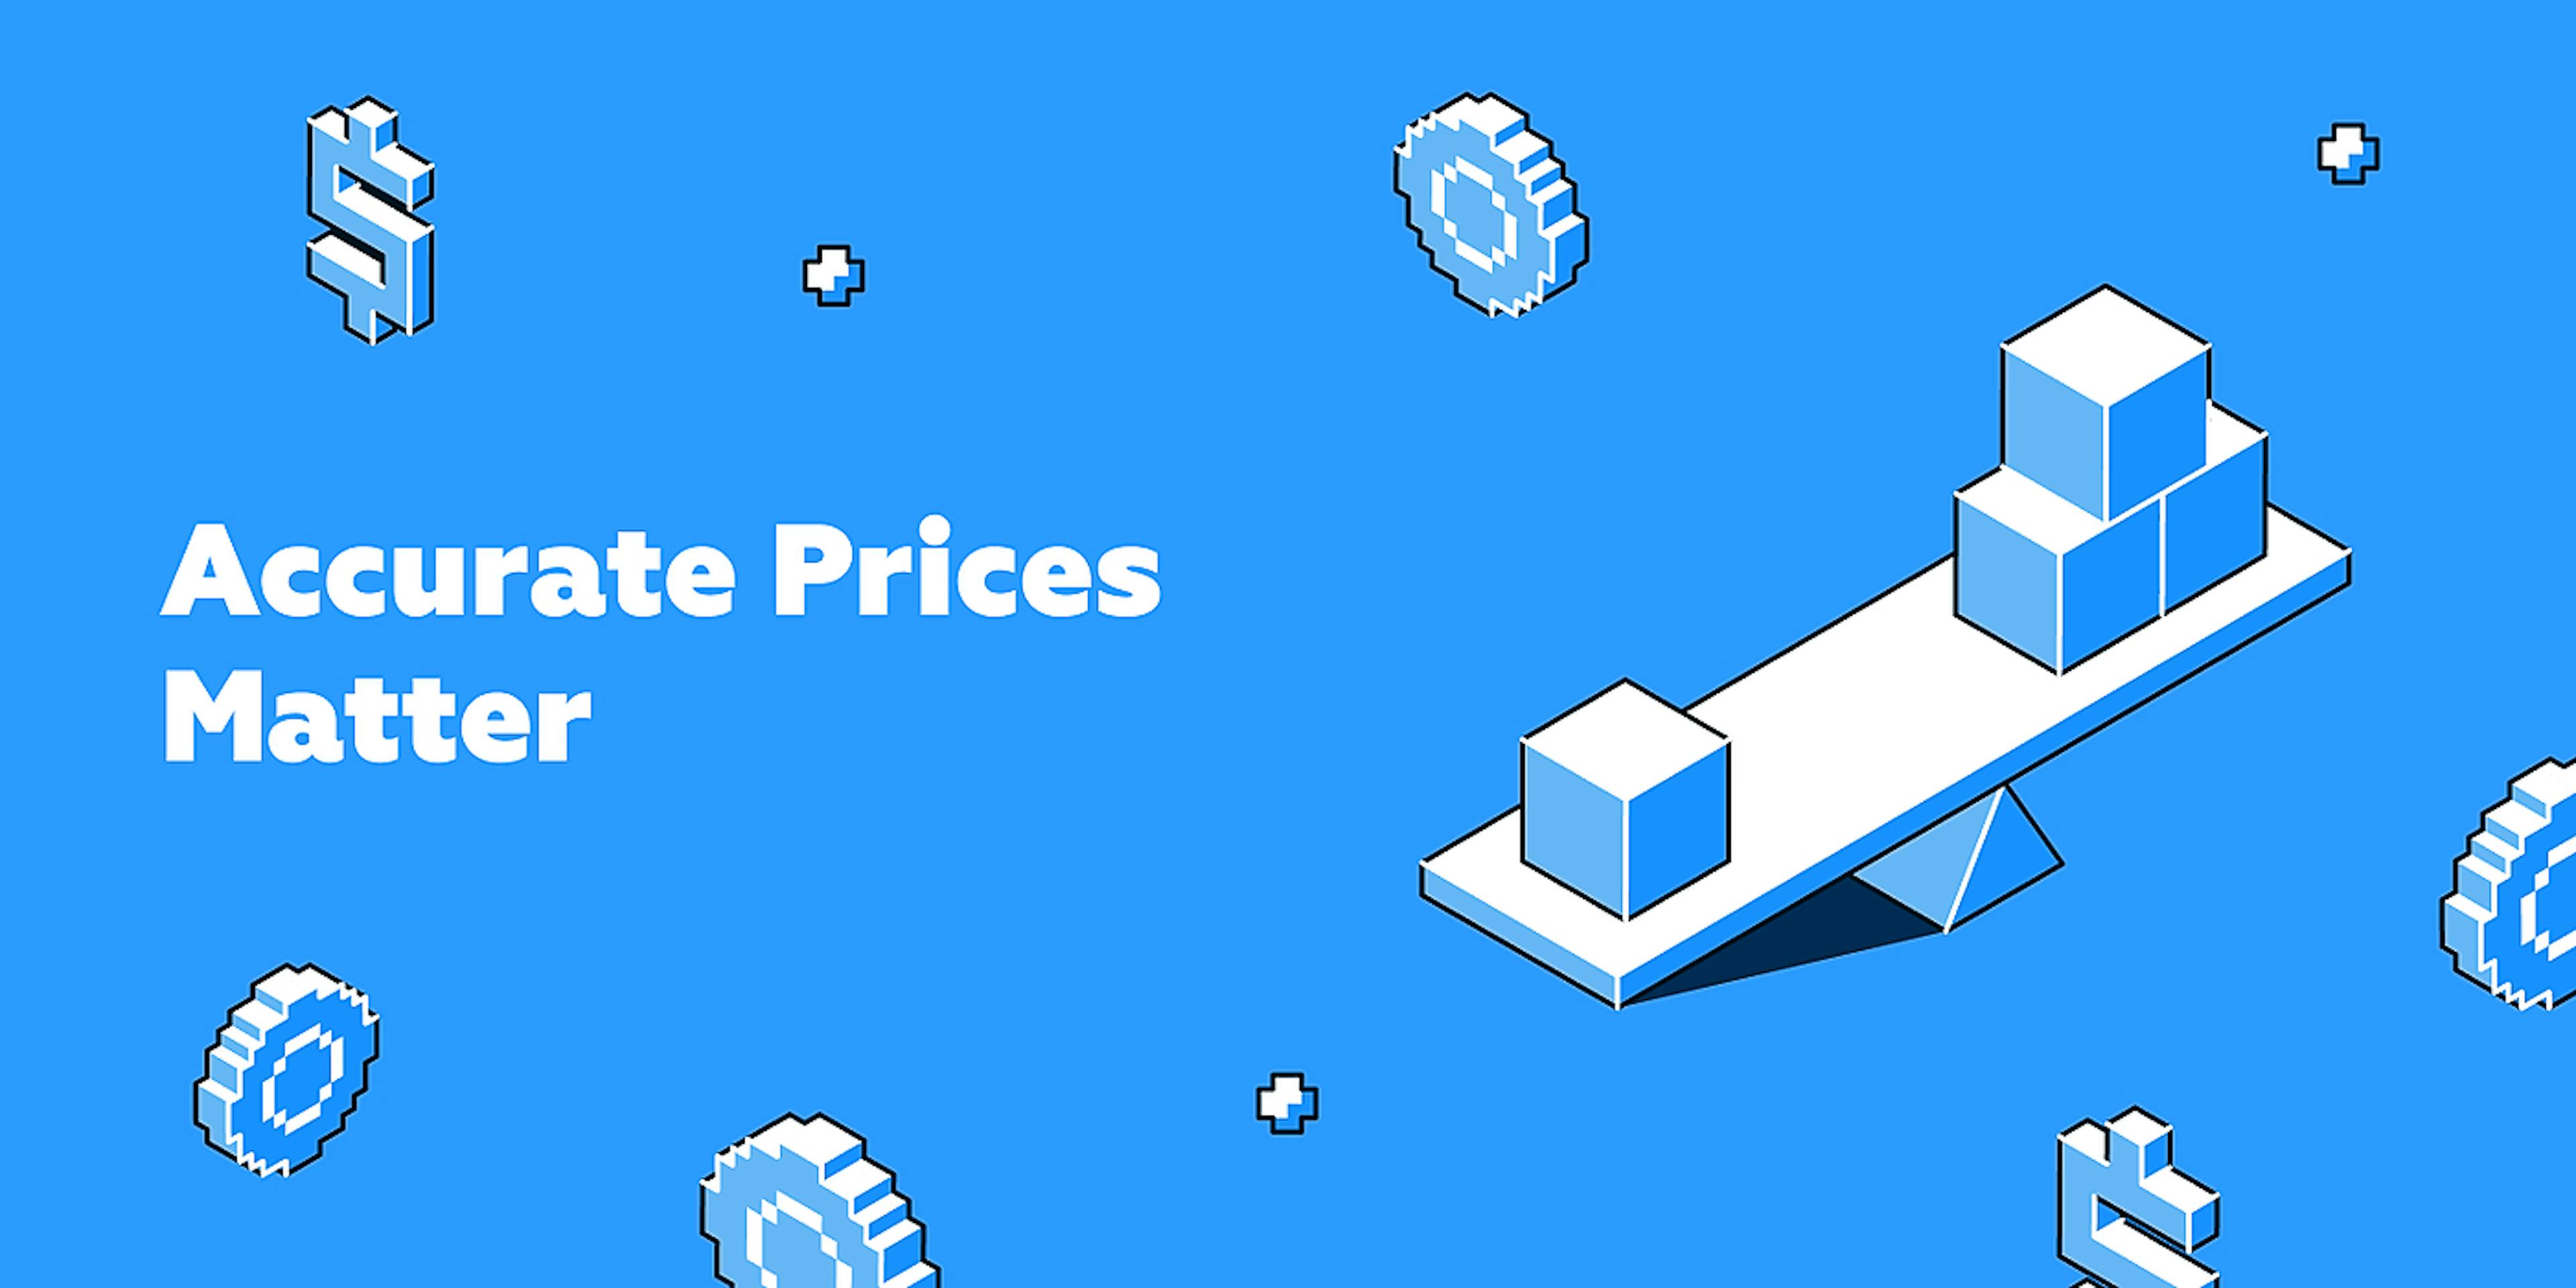 /accurate-prices-matter-a-guide-for-stablecoins-owners-on-handling-liquidation-0e1qc3rbm feature image